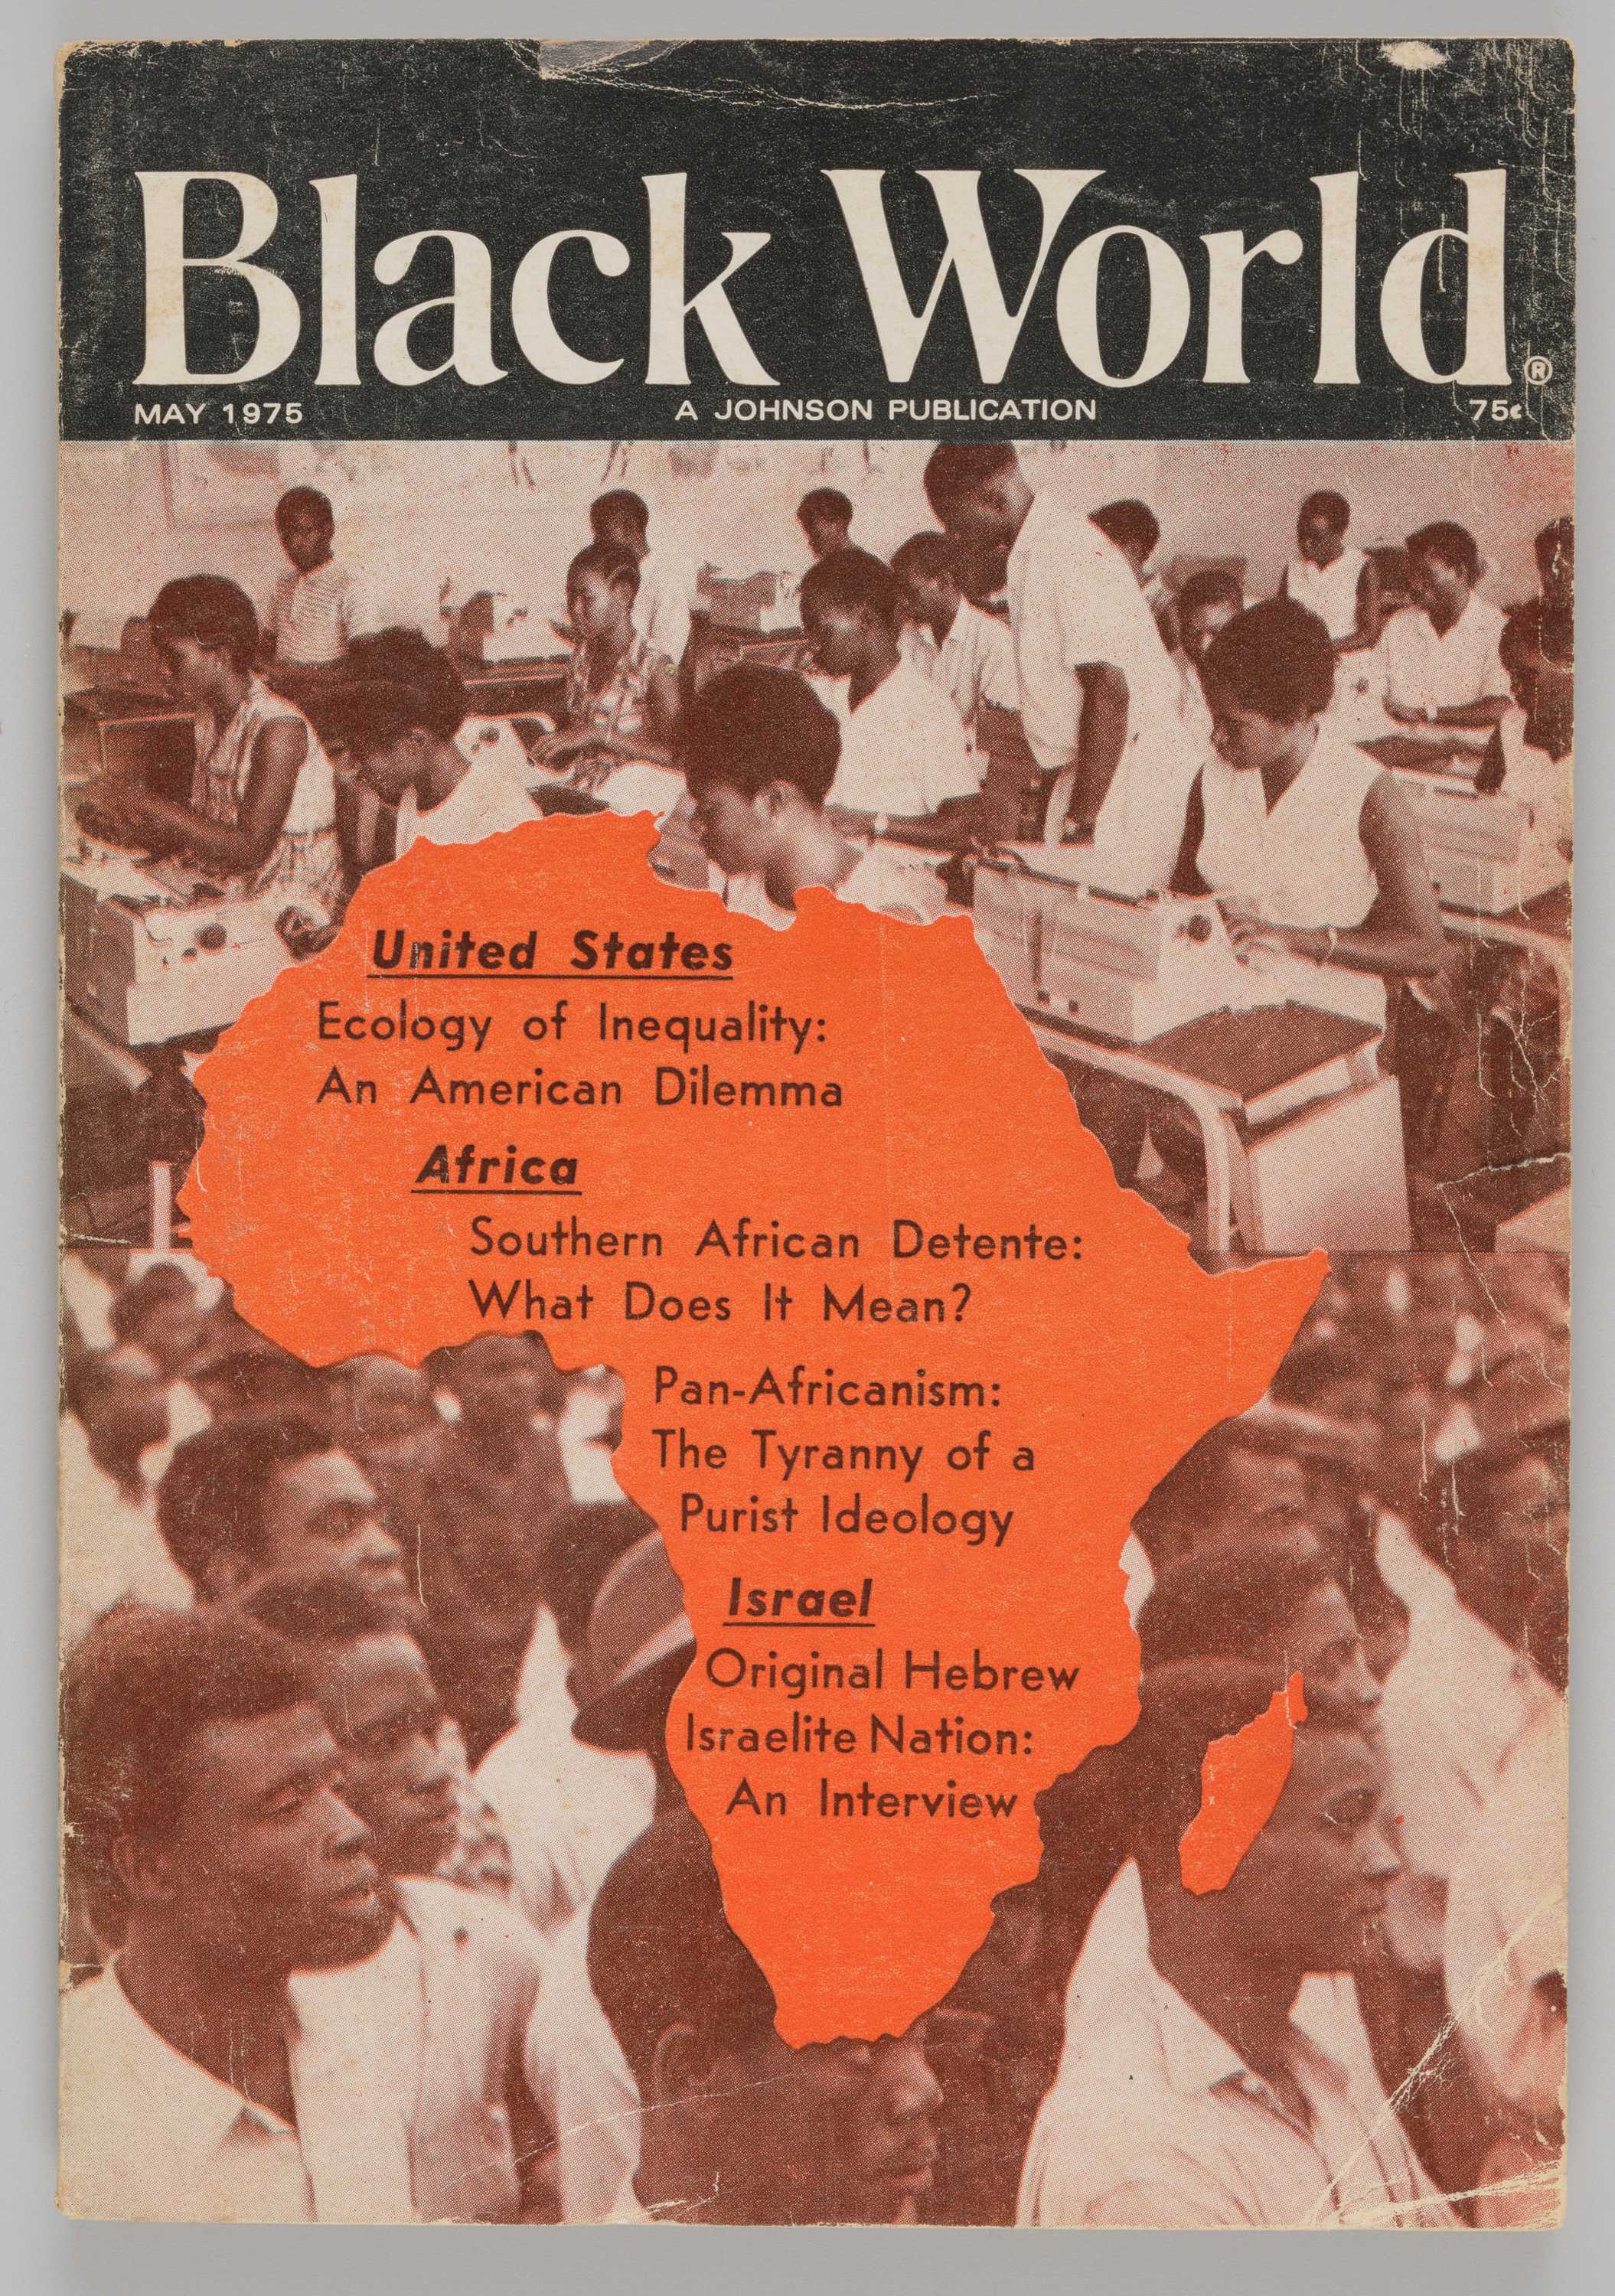 The May 1975 issue of Black World magazine.